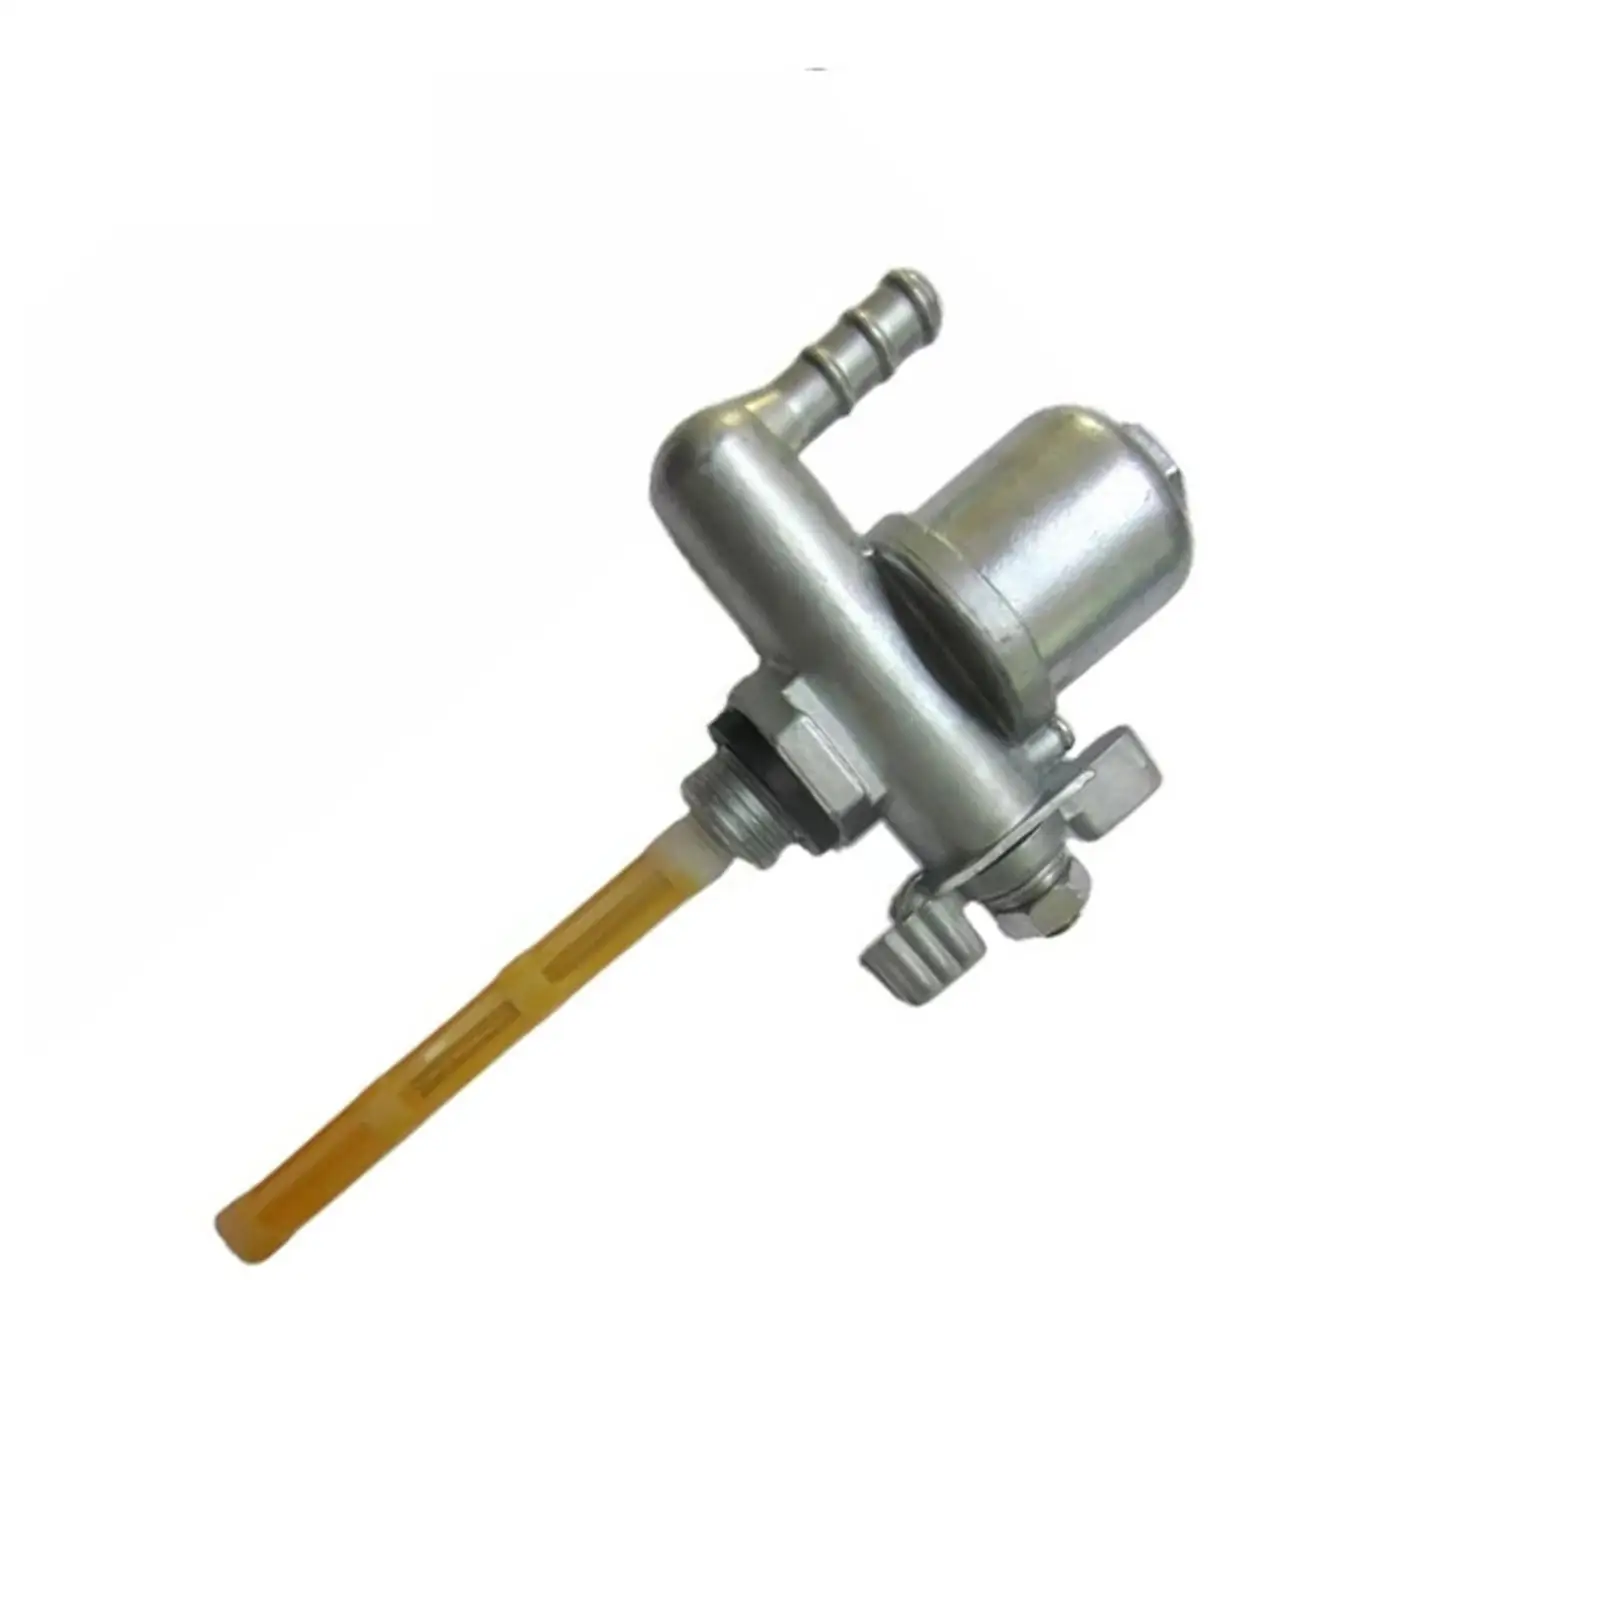 Motorcycle Fuel Gas Tank Switch Valve Petcock Repair Parts for Ruassia Msk Advanced manufacturing technology, high reliability.